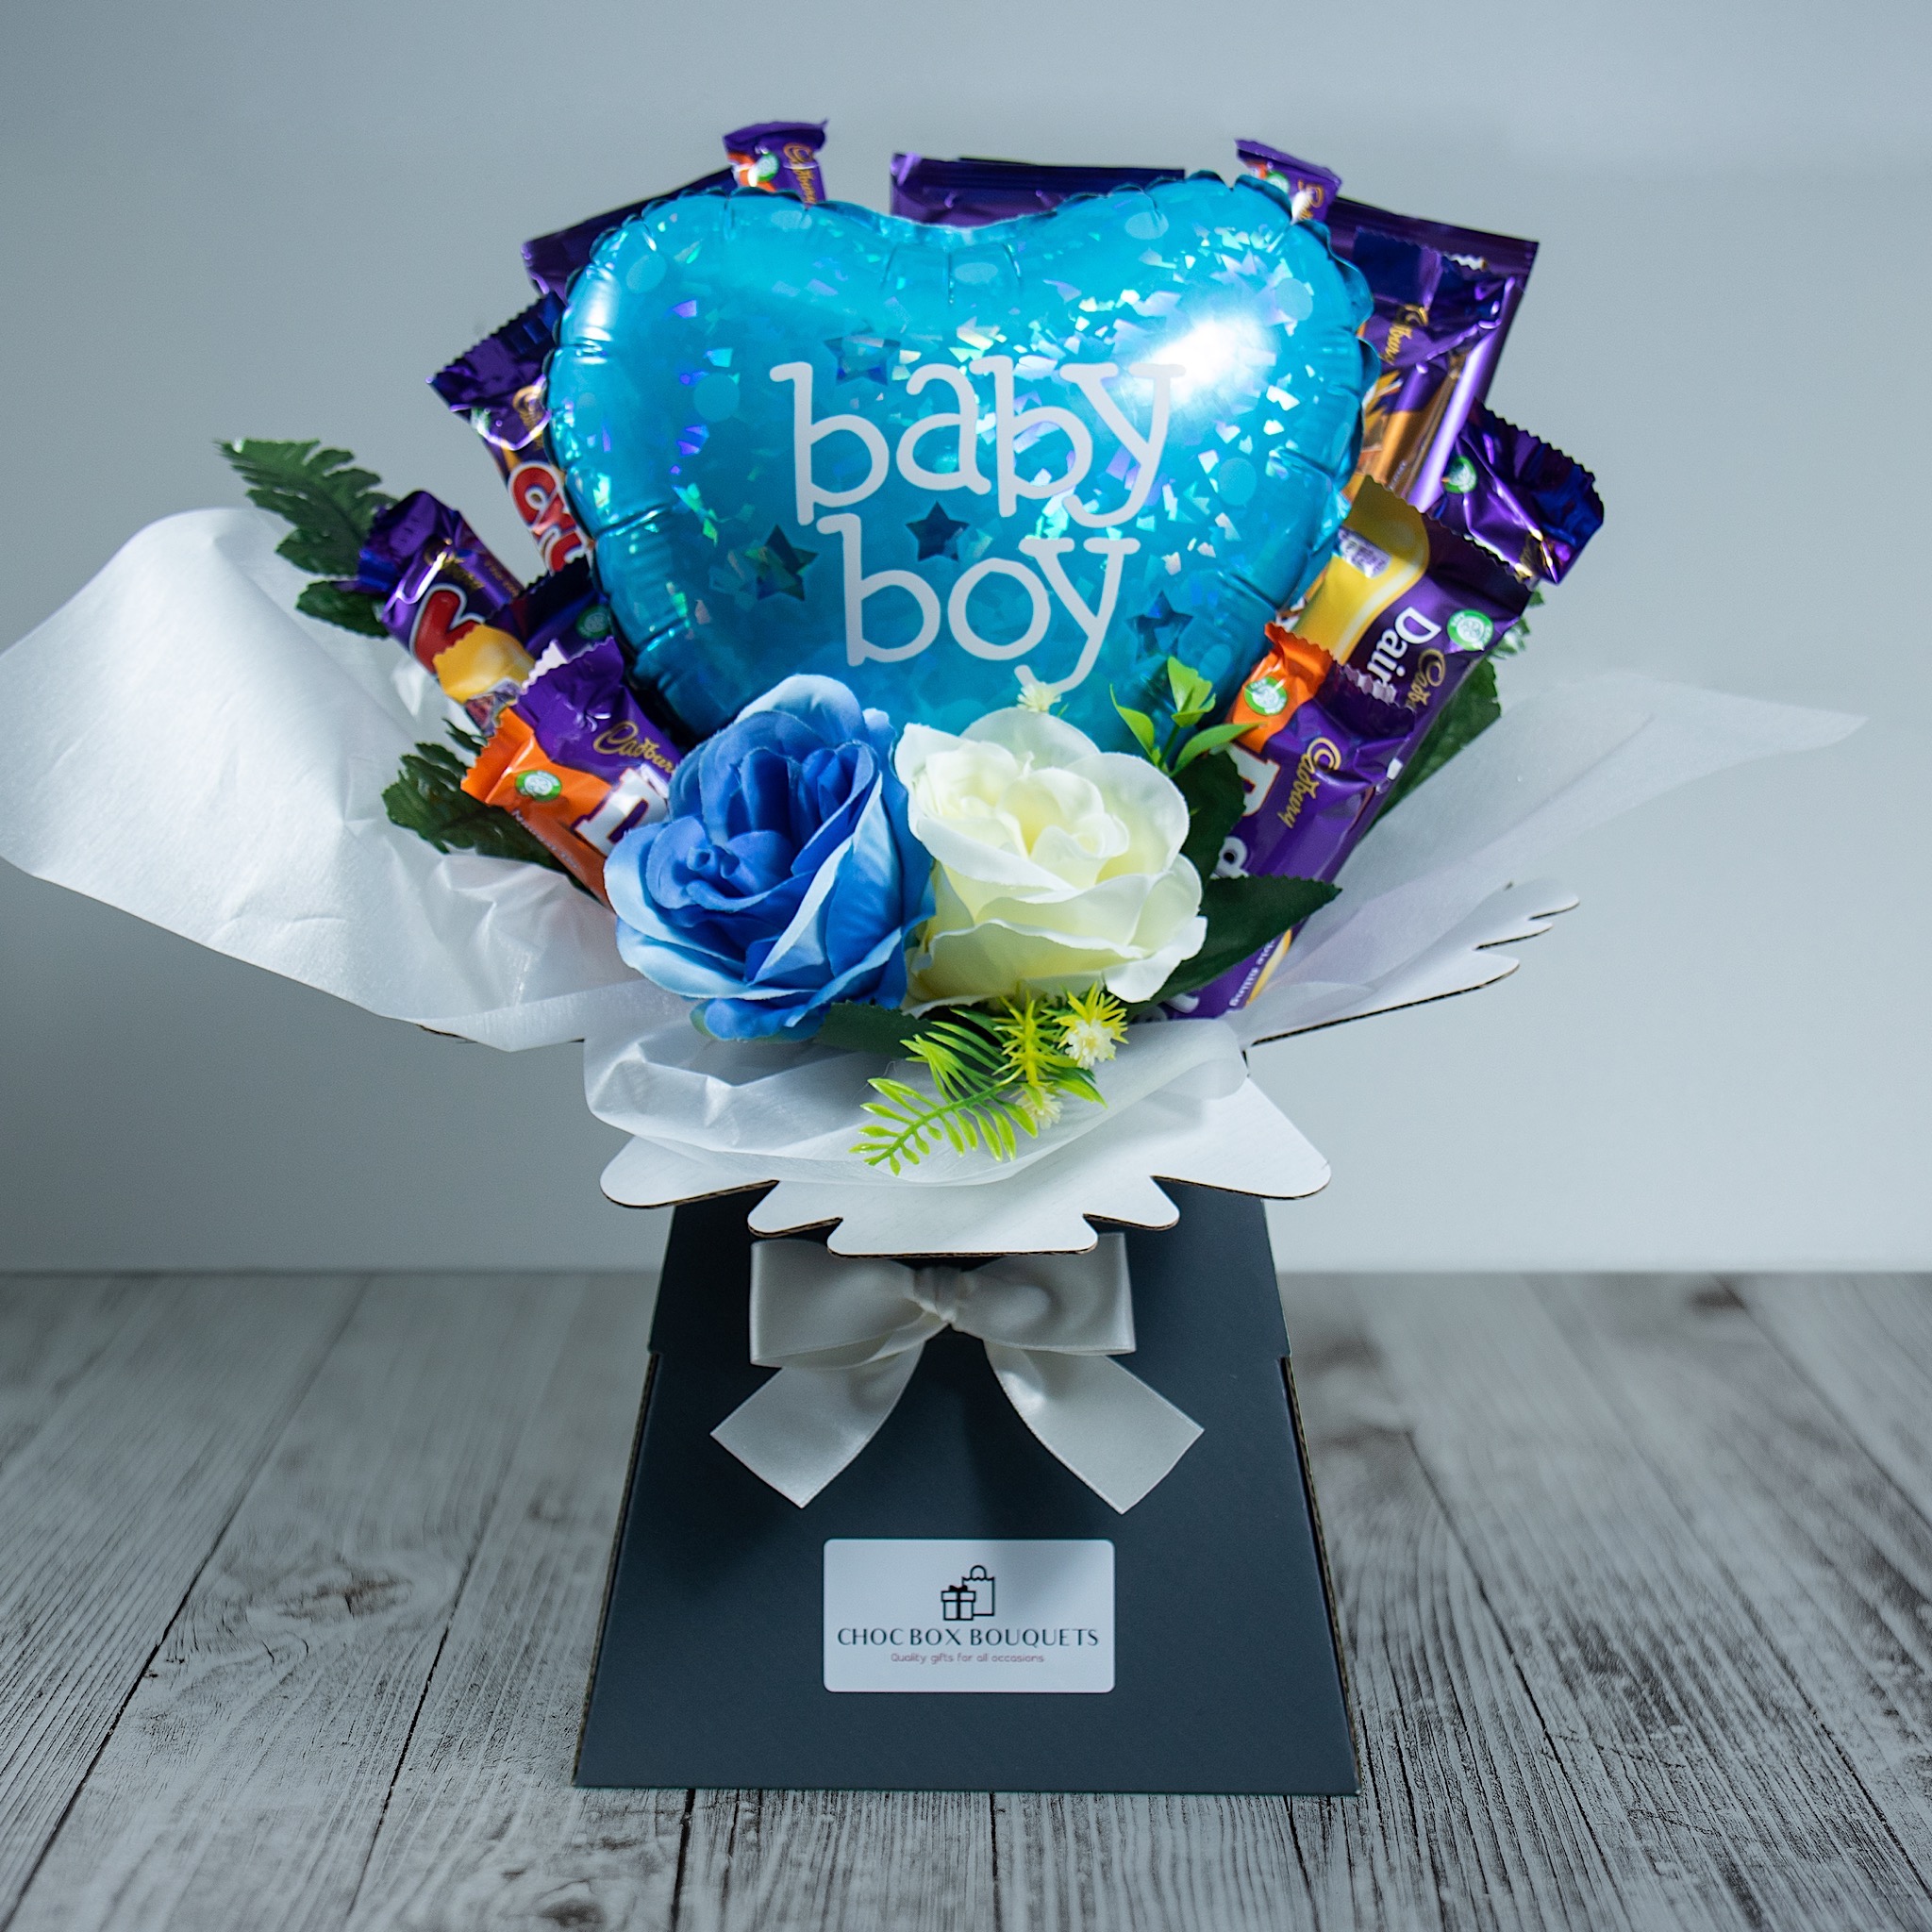 Chocbox Bouquets